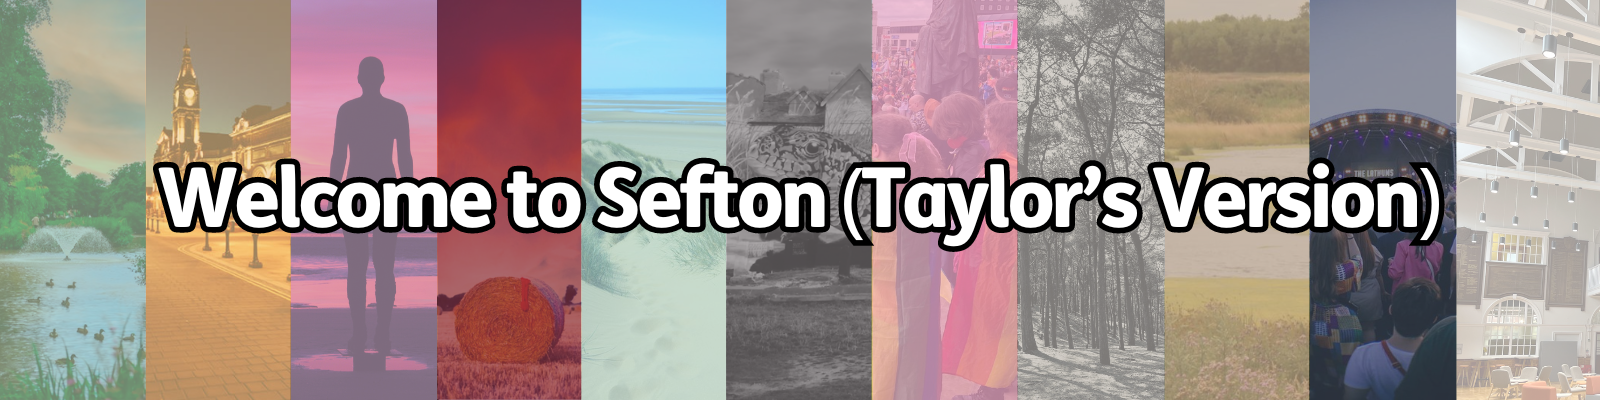 welcome to sefton banner 